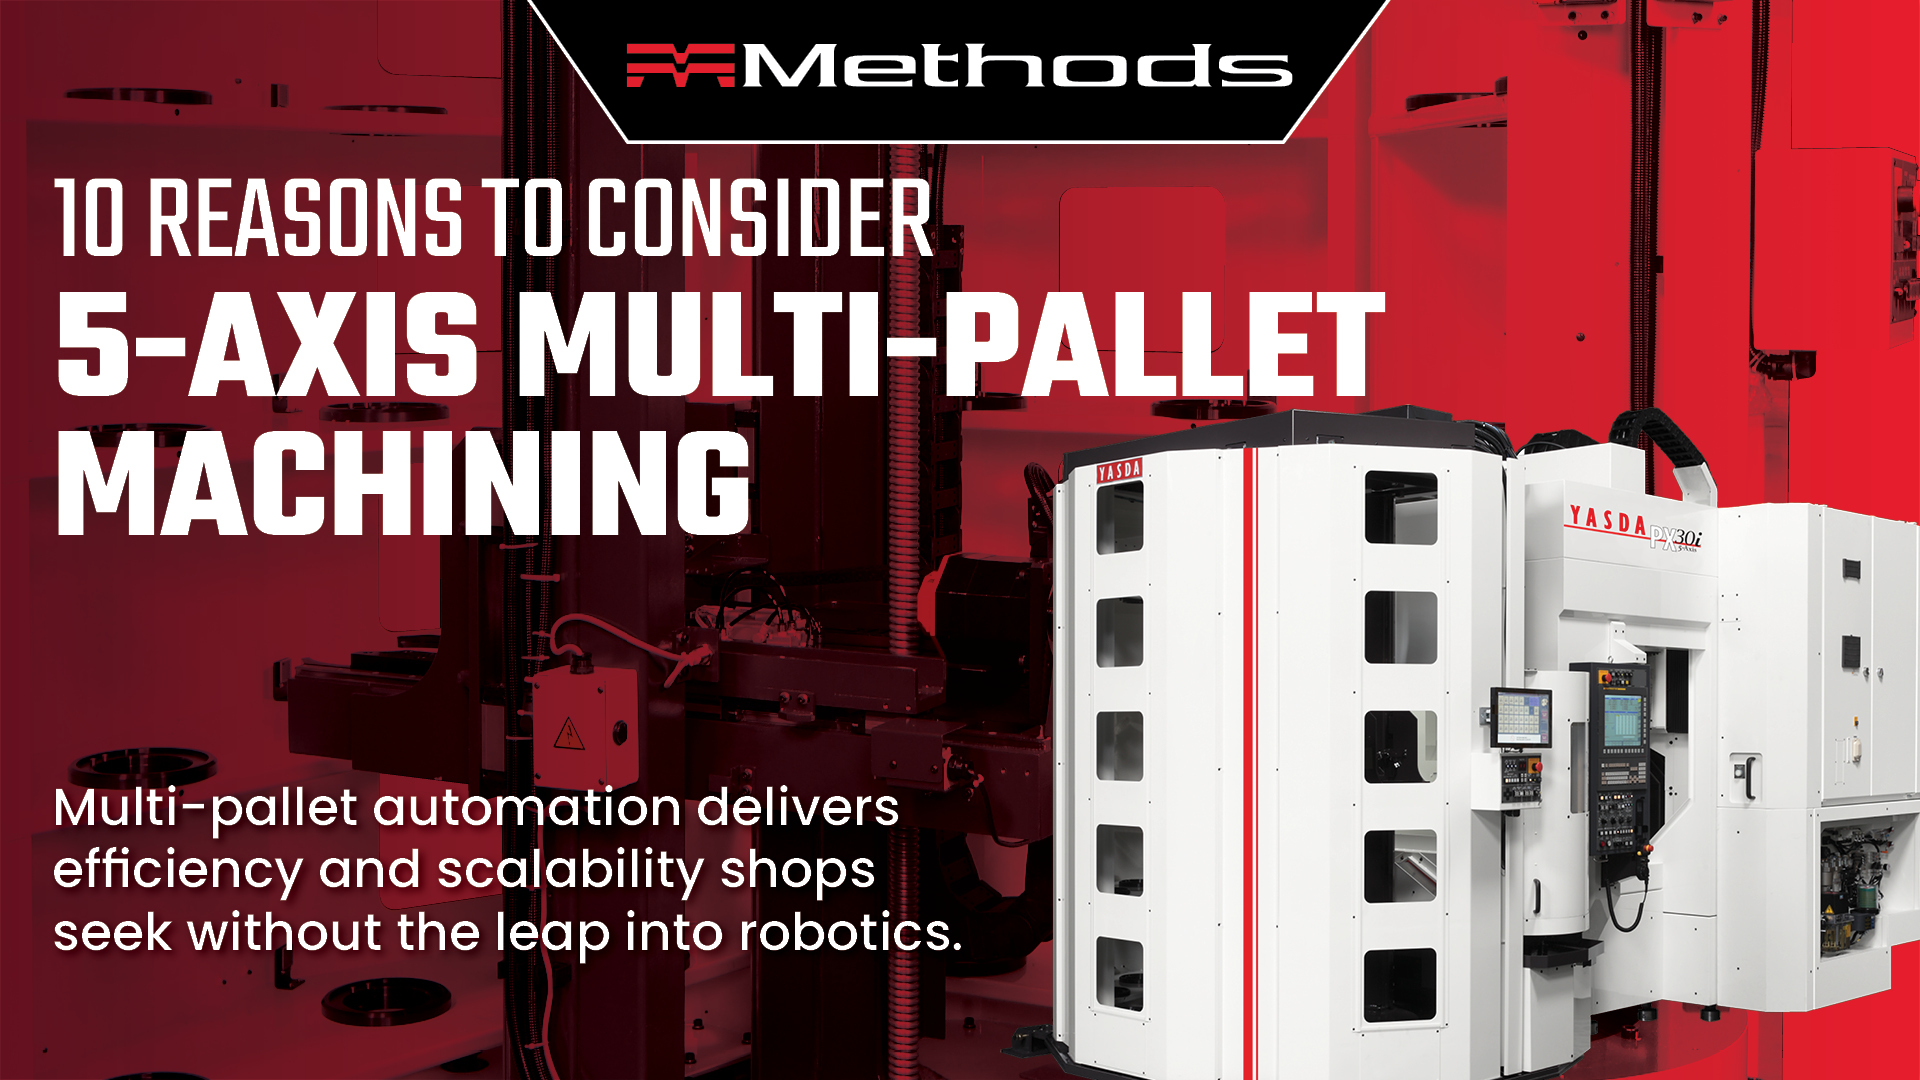 10 Reasons to Consider 5-Axis Multi-Pallet Machining